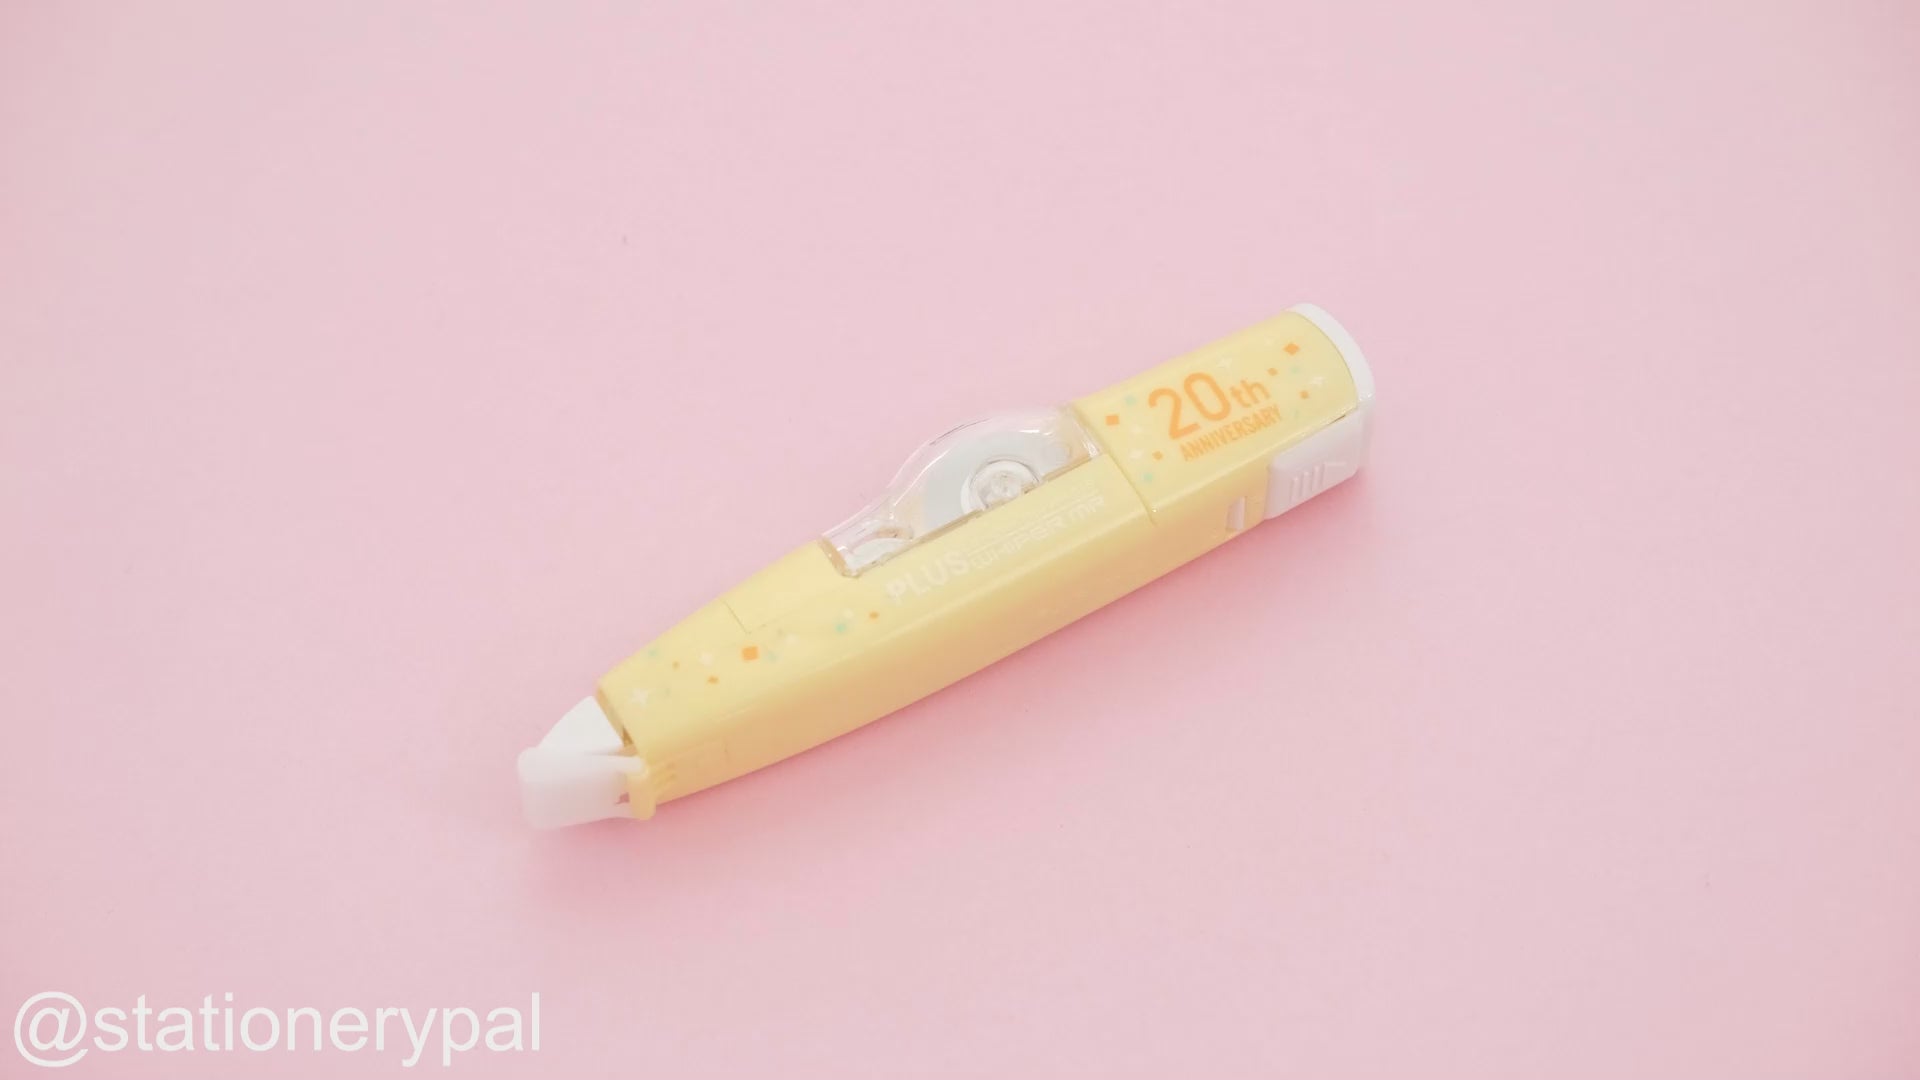 Plus Whiper Mr Correction Tape - 20th Anniversary Limited Edition - Yellow